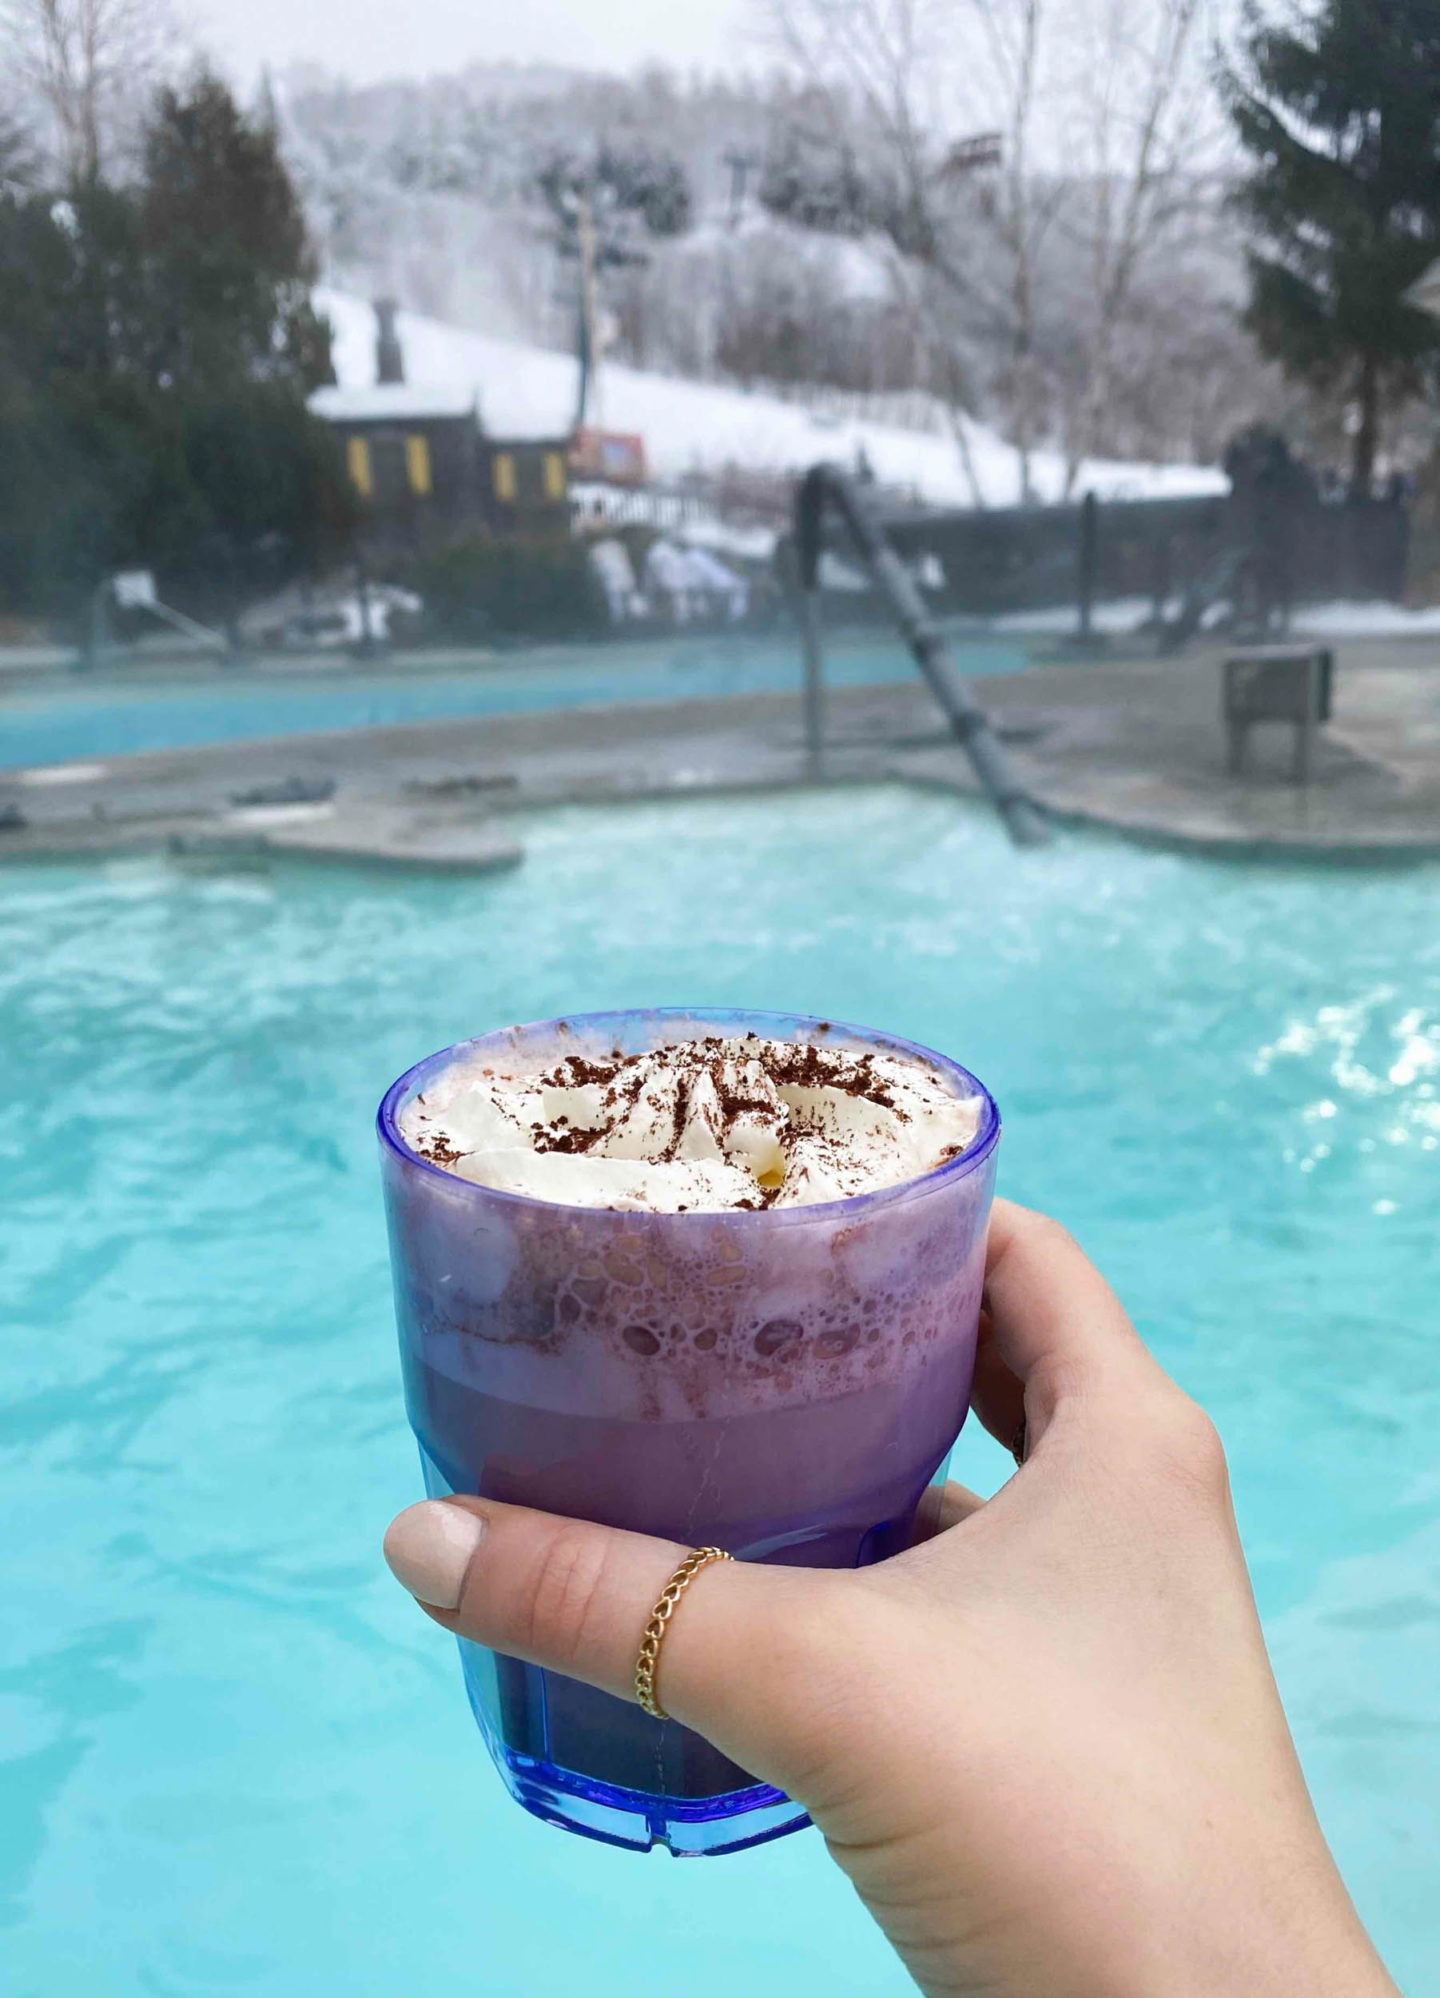 The most magical ski trip to Mont-Tremblant in the heated outdoor pool with hot chocolate